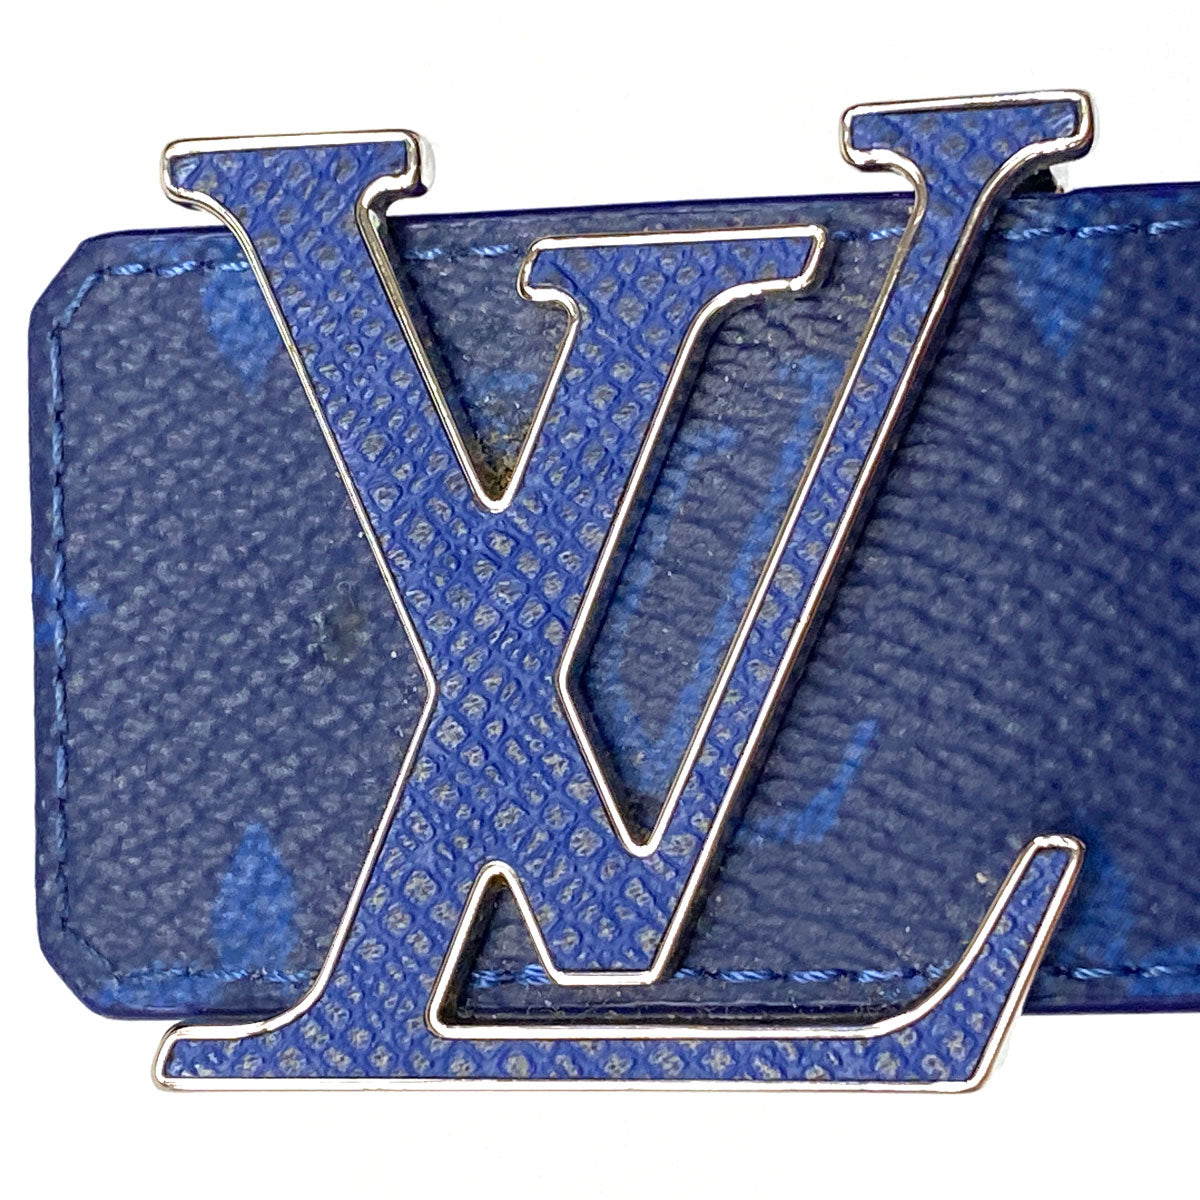 Louis Vuitton LV Initiales 40mm Reversible Belt – Chicago Pawners